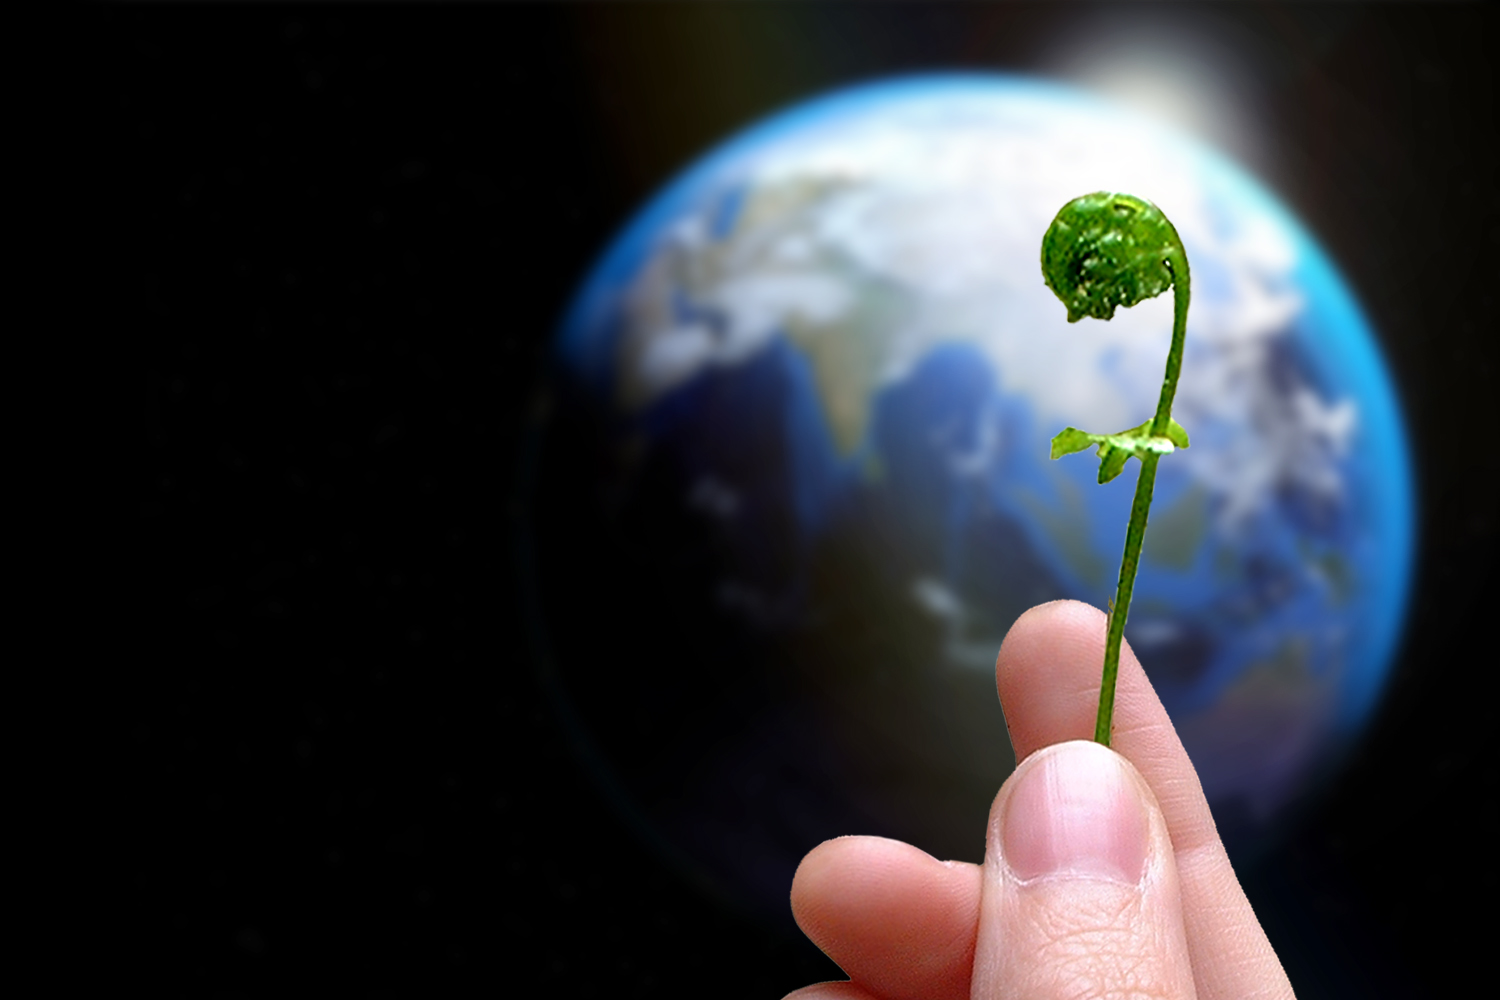 Rhiannon's hand holding a fiddlehead fern with a photo of planet Earth in the background